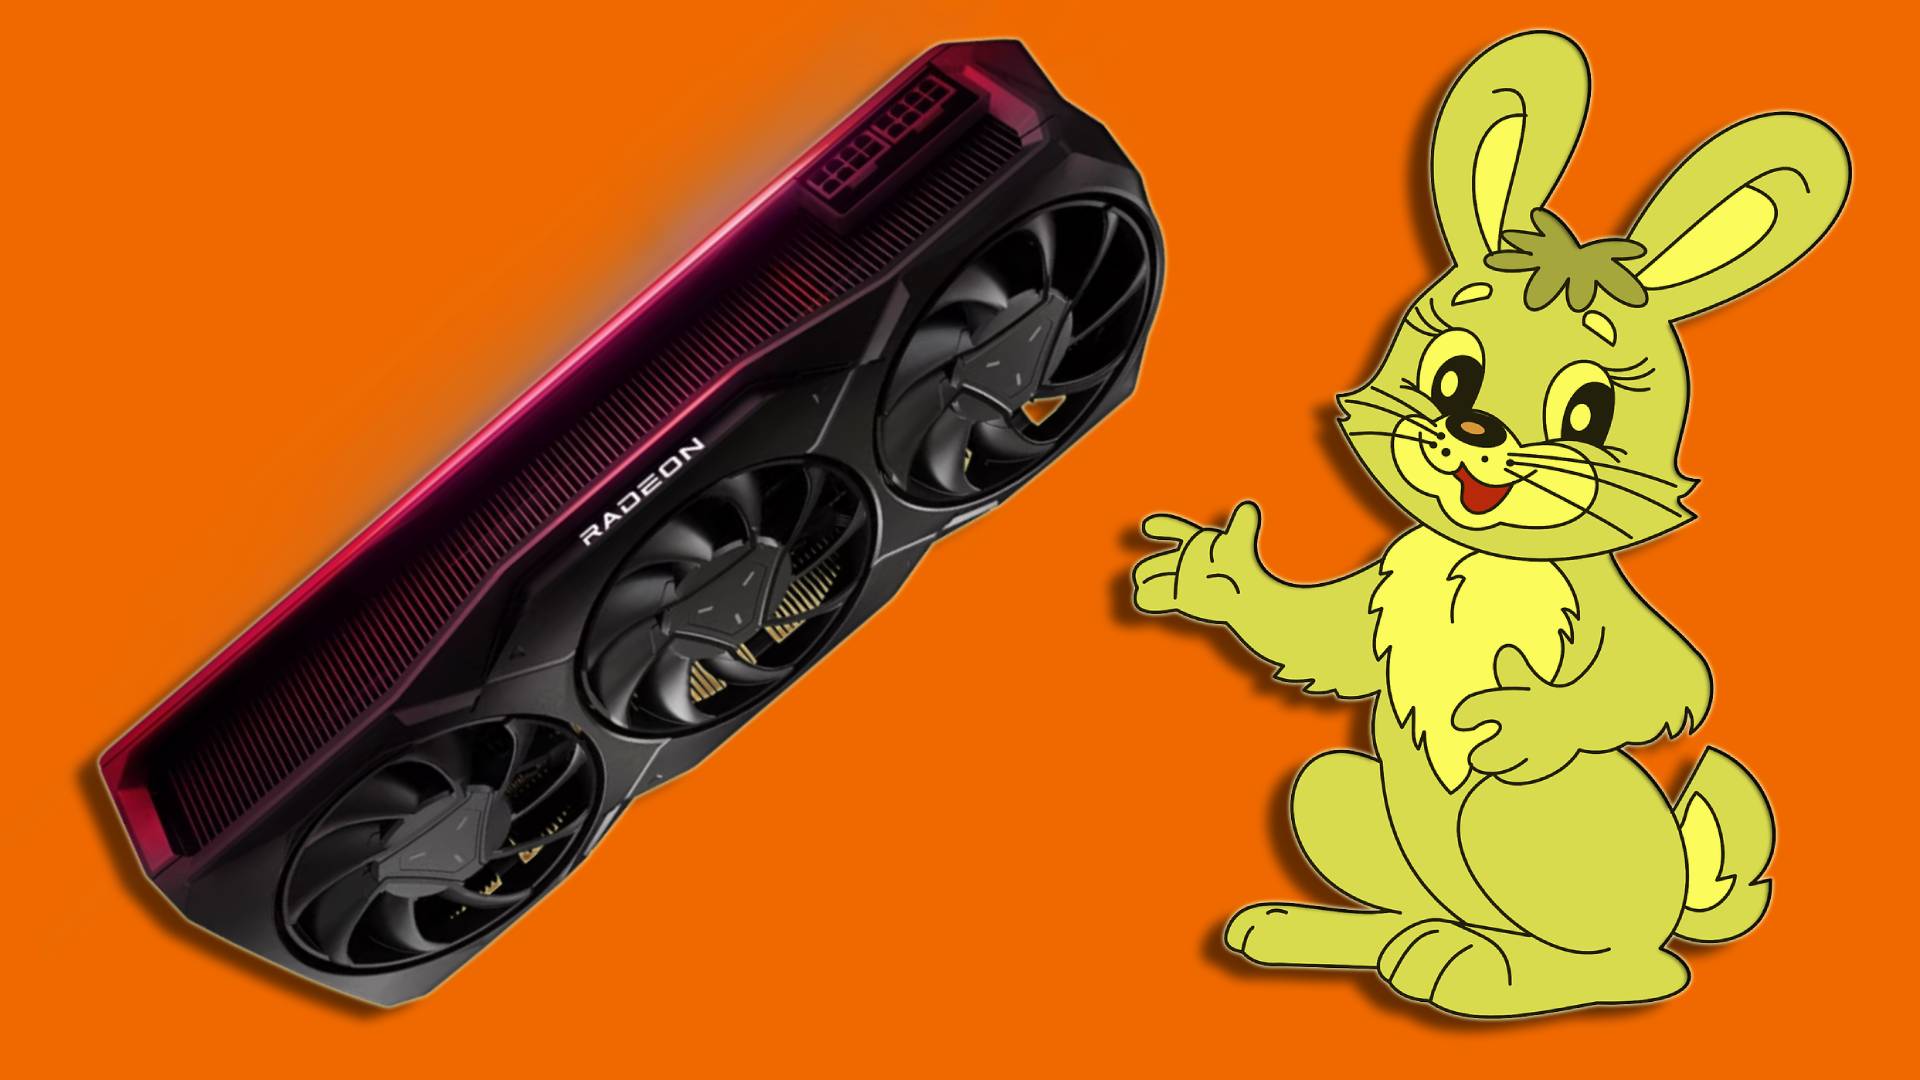 AMD just launched a new GPU, but you can't have it